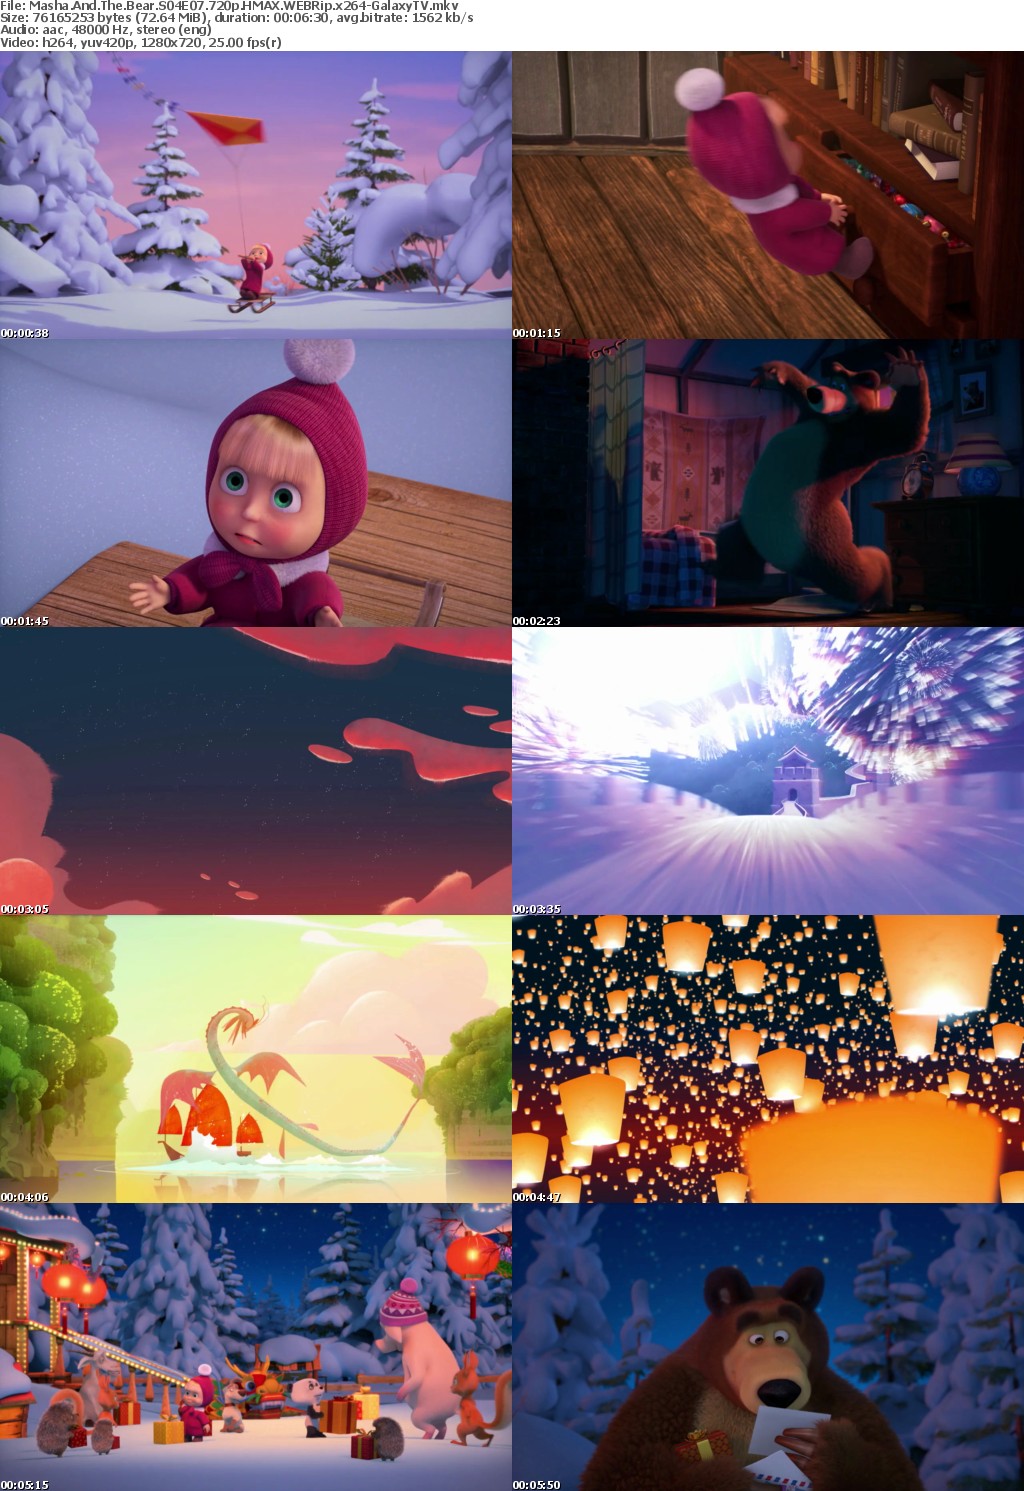 Masha And The Bear S04 COMPLETE 720p HMAX WEBRip x264-GalaxyTV